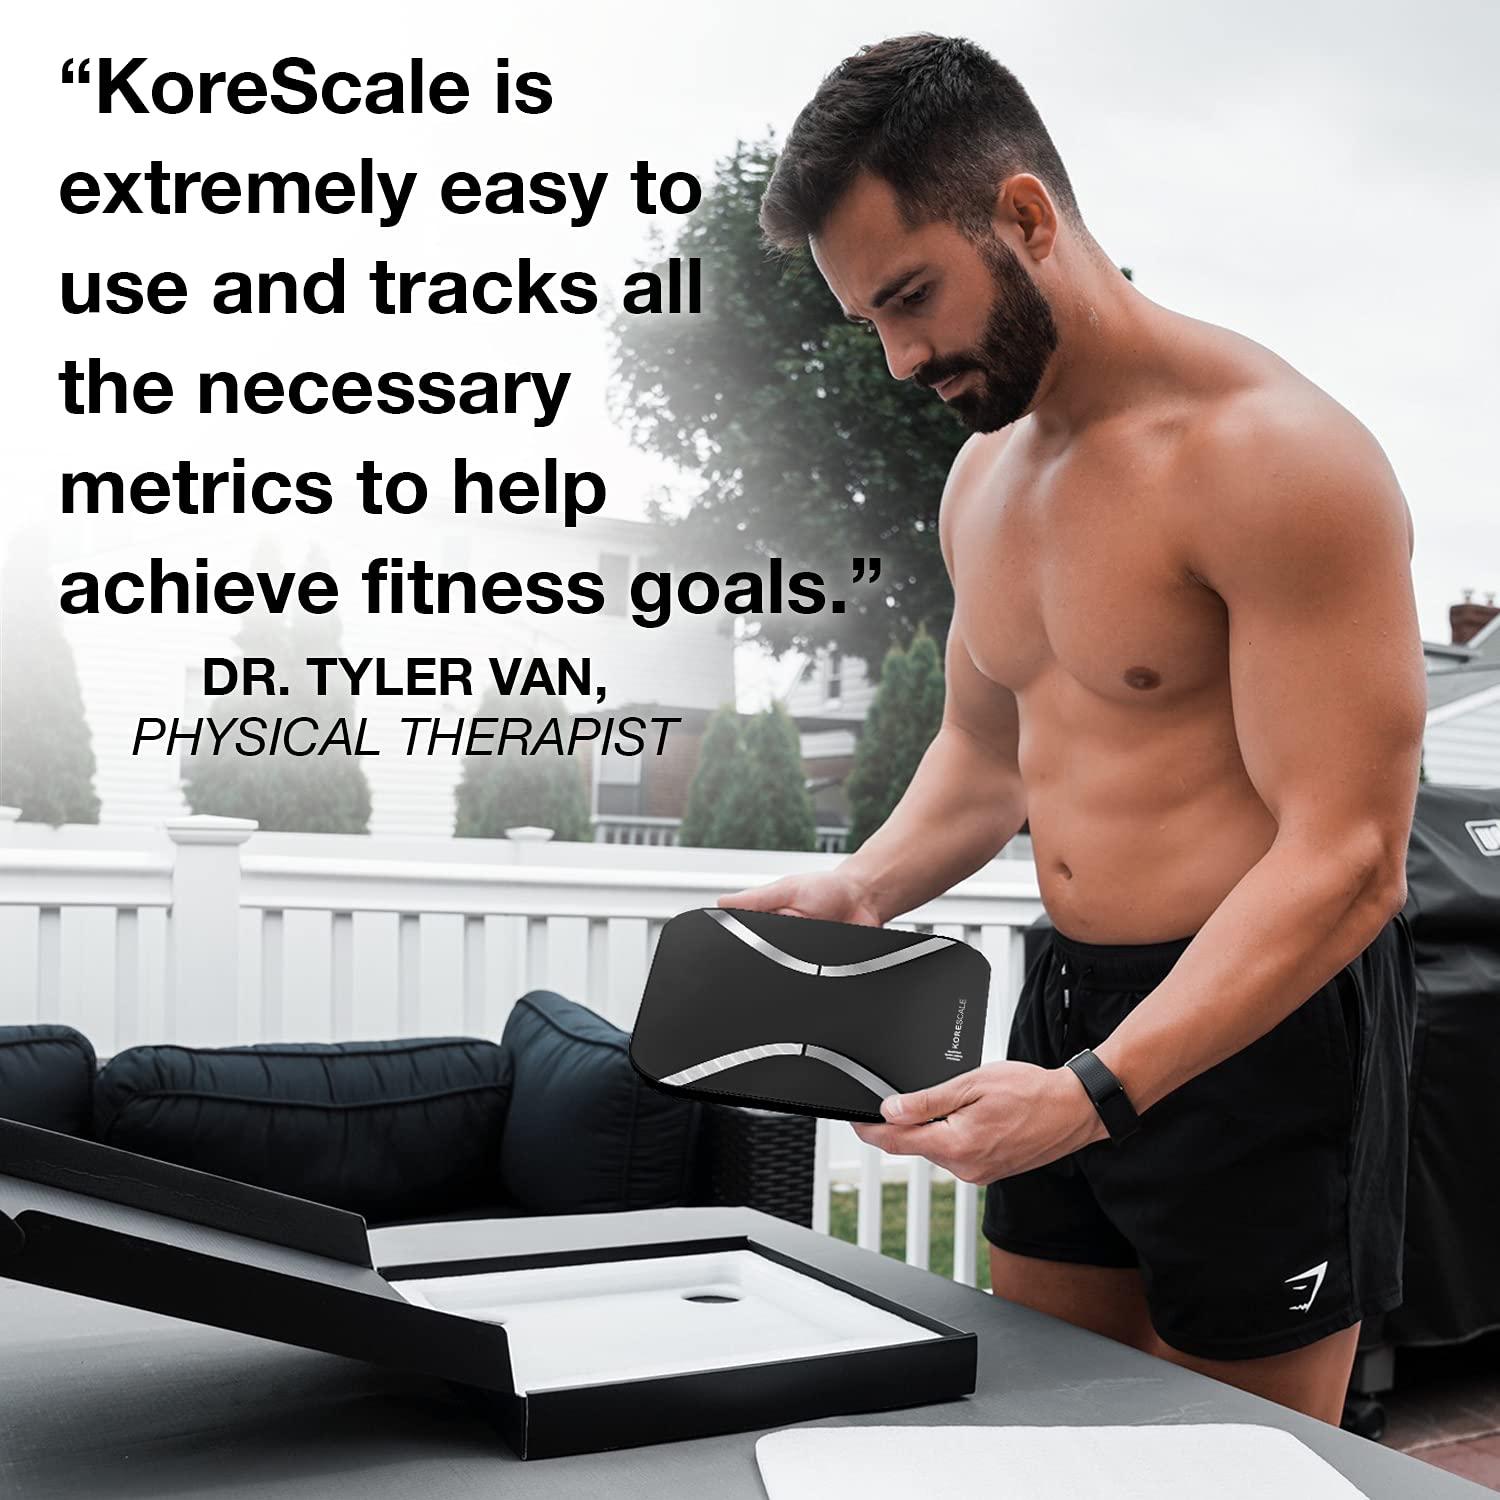 KOREHEALTH Korescale G2 - Smart Scale for Body Weight | Home Bathroom Scale  Tracks BMI, Muscle Mass, Body Liquids and More | Weight Scale with